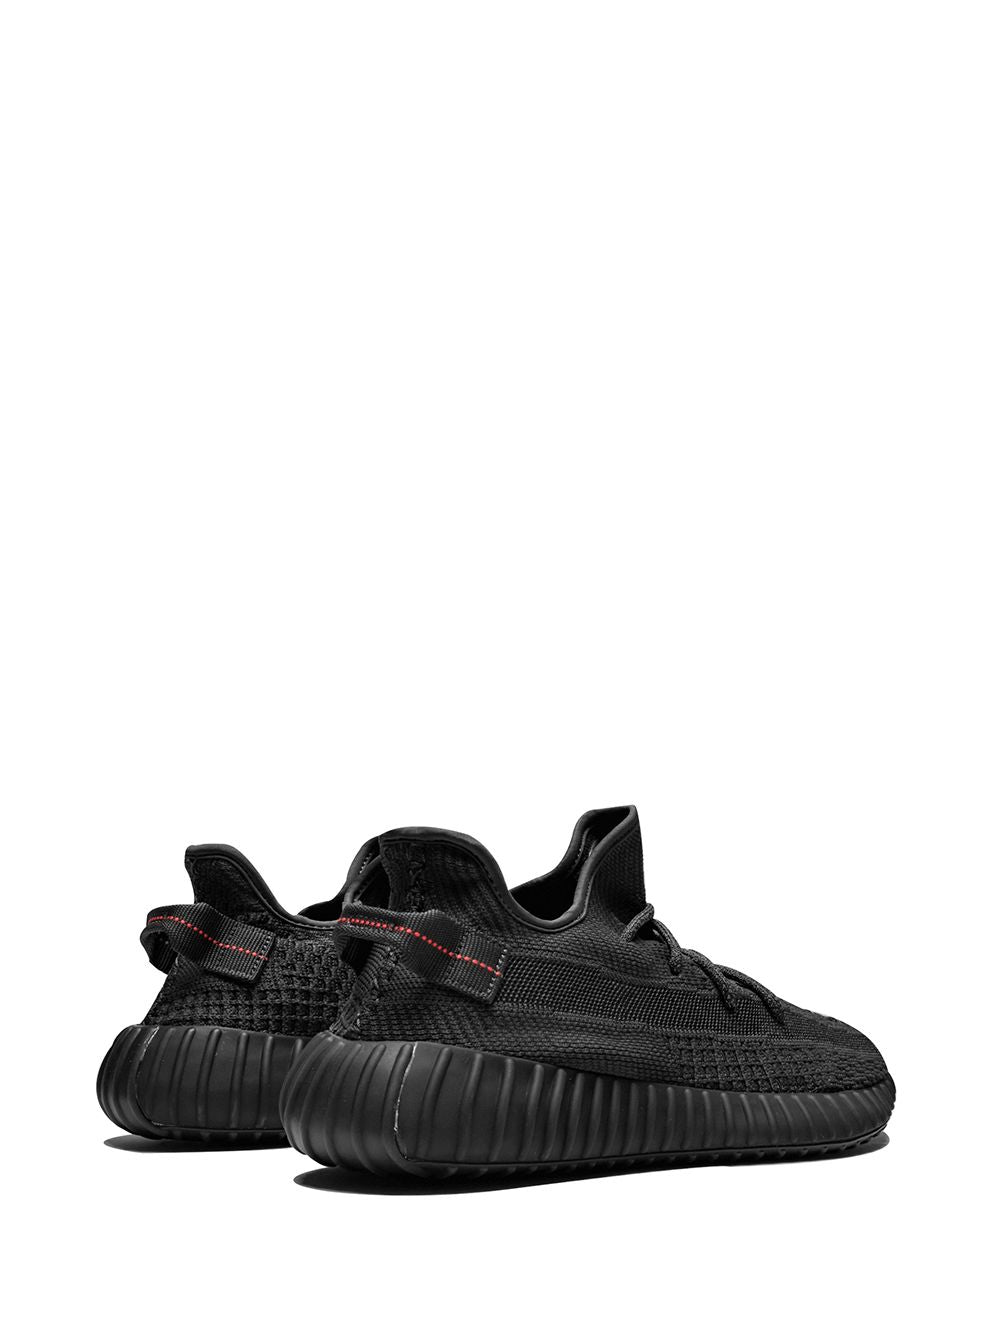 Adidas Yeezy Boost 350 V2 "Black Static" sneakers